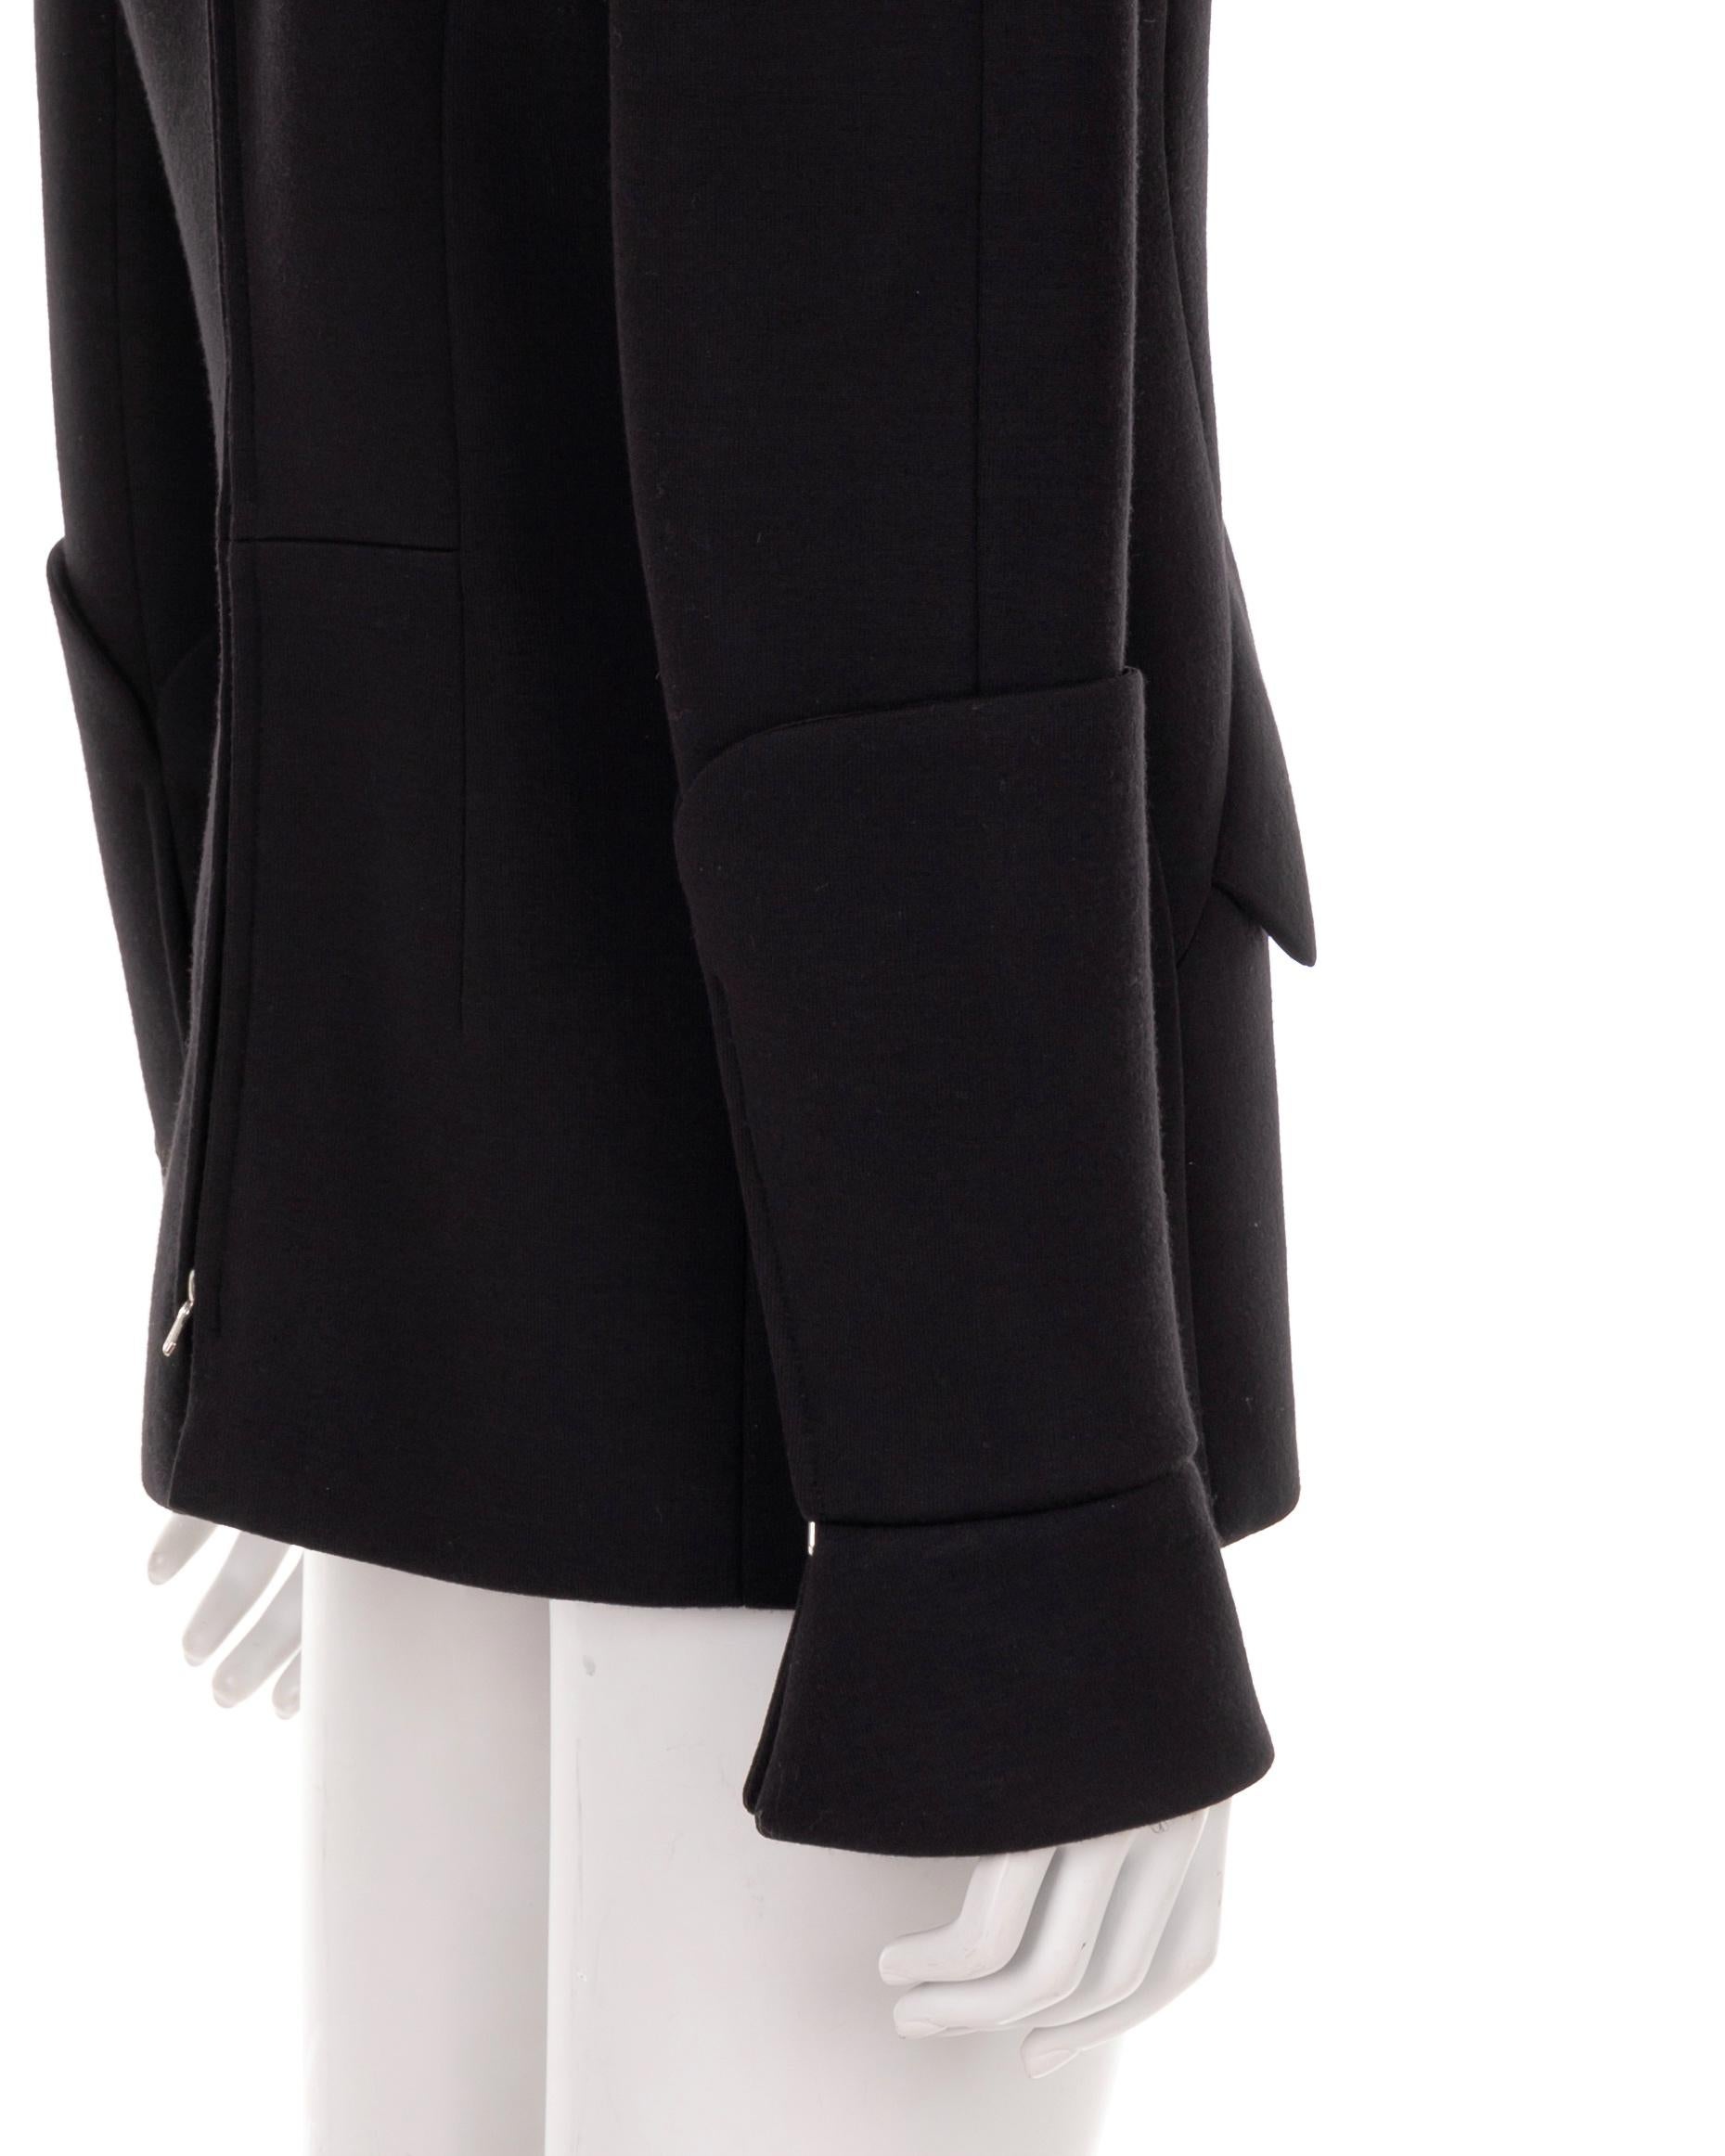 Chanel by Karl Lagerfeld F/W 2009 black wool/nylon paneled jacket In Excellent Condition For Sale In Rome, IT